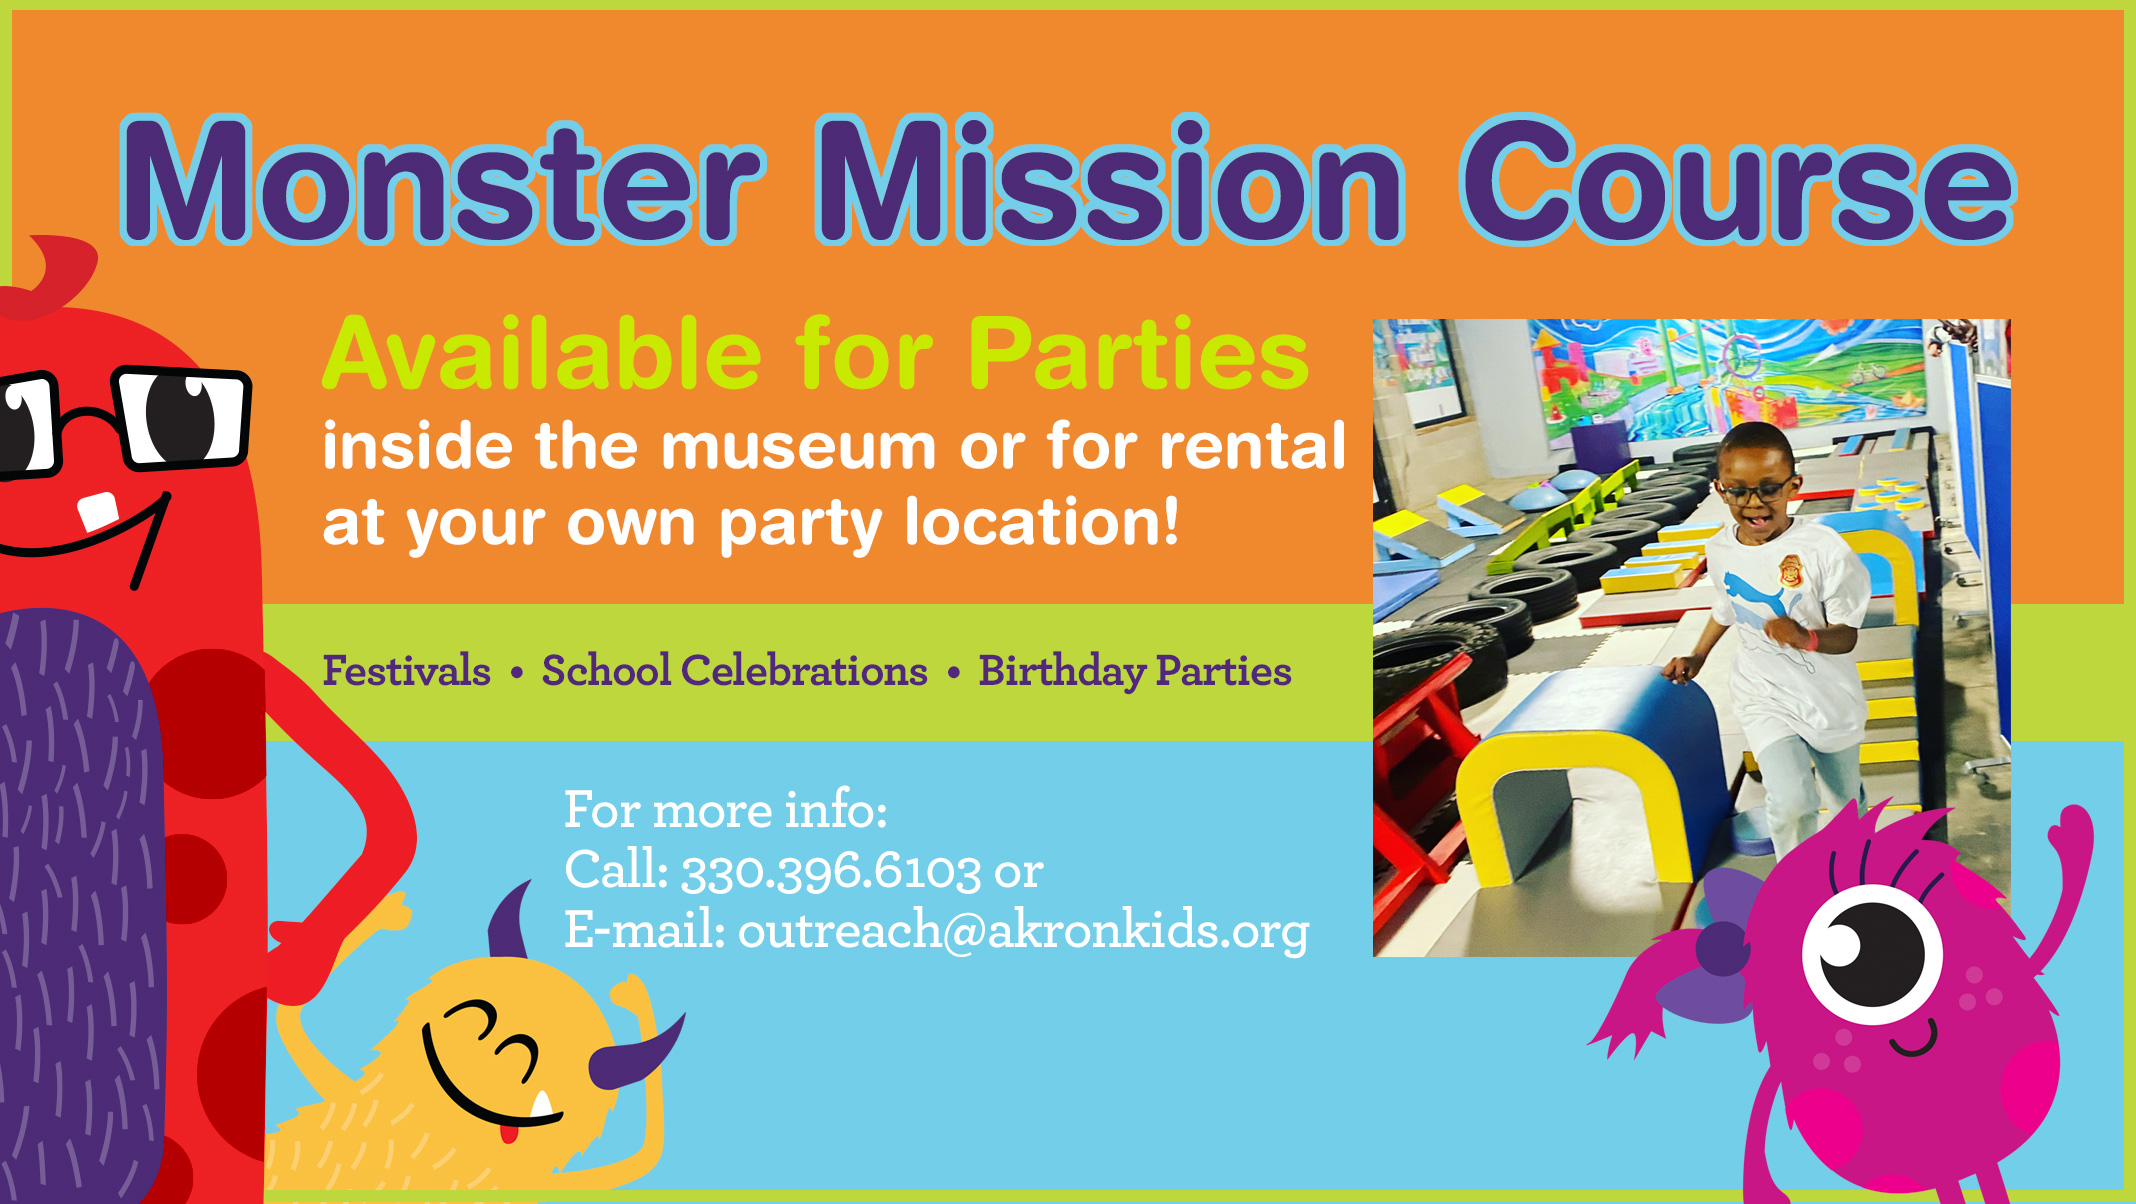 Monster Mission course is available for parties.